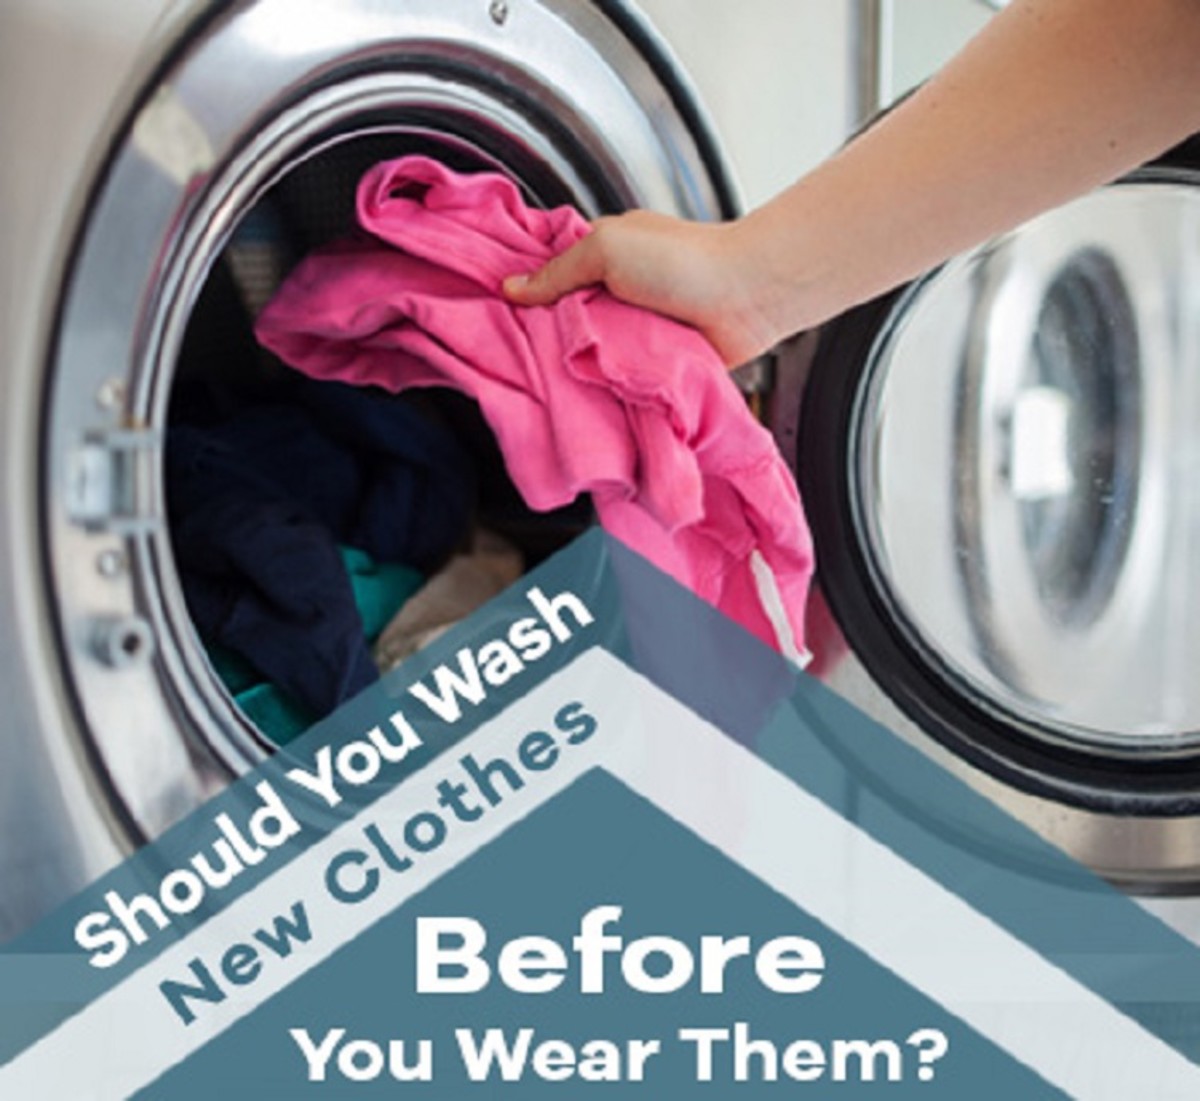 Should You Wash New Clothes Before You Wear Them? Here's the Verdict!